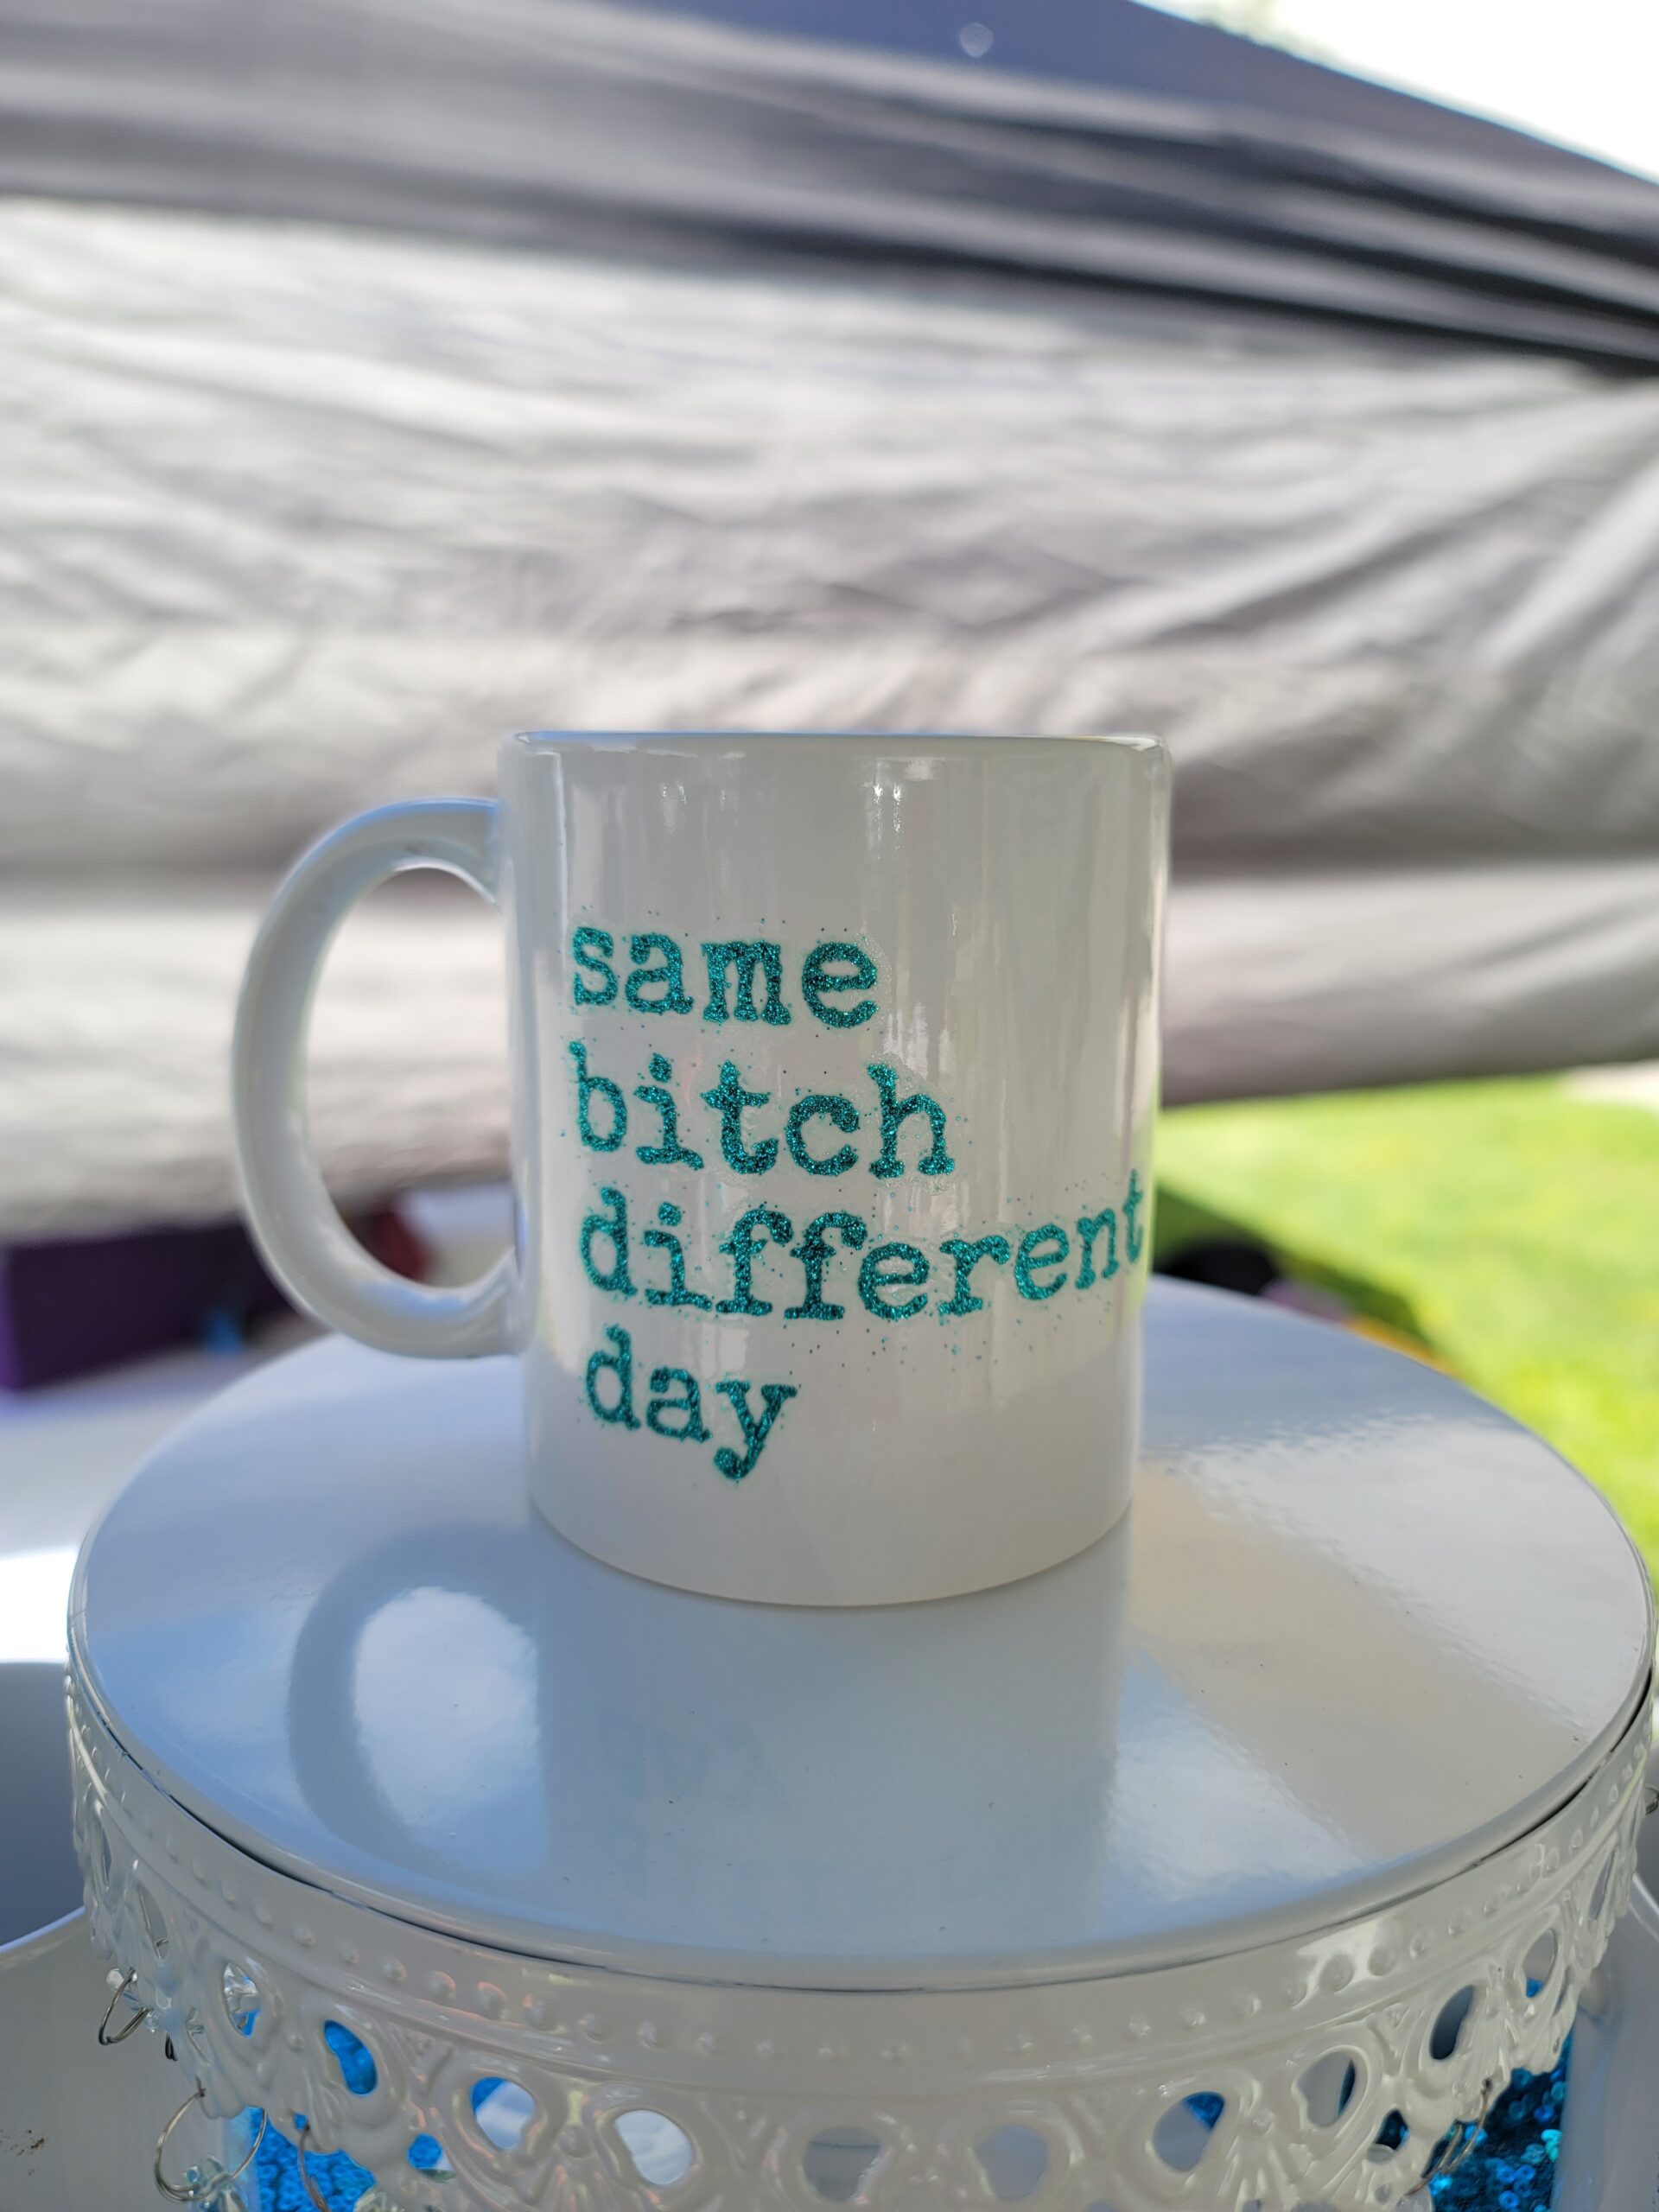 same bitch different day - coffee cup